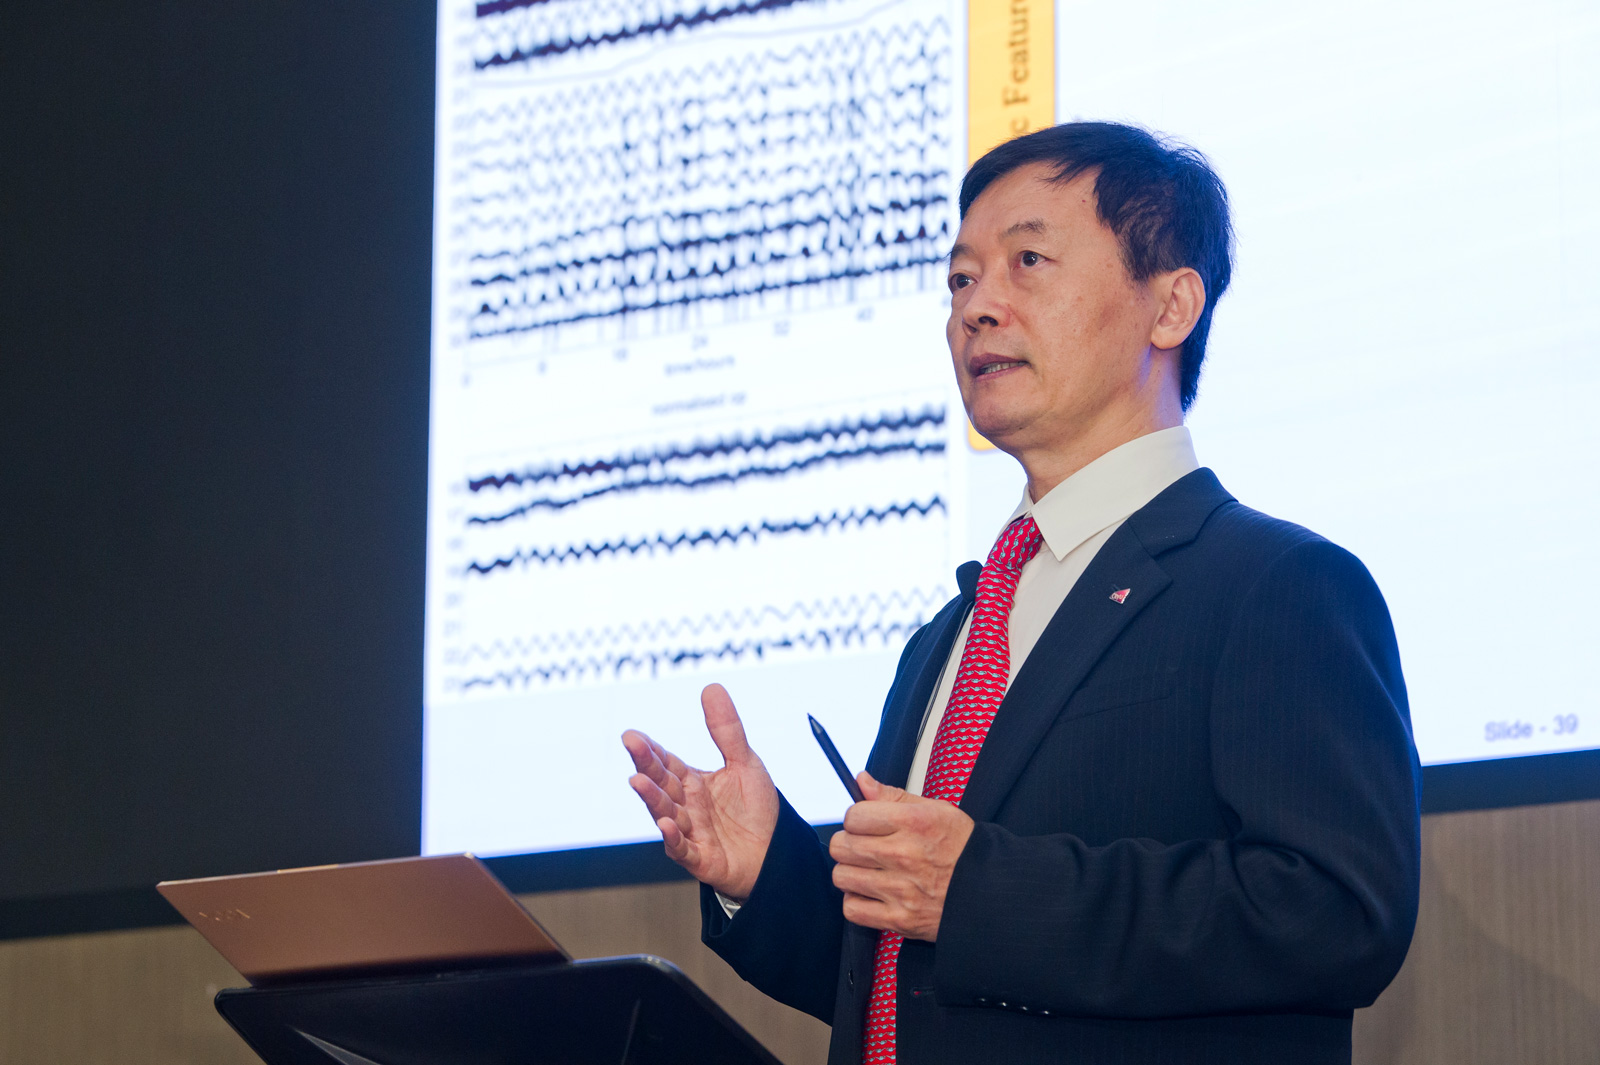 Professor Qin speaks at the latest instalment of the President’s Lecture Series: Excellence in Academia